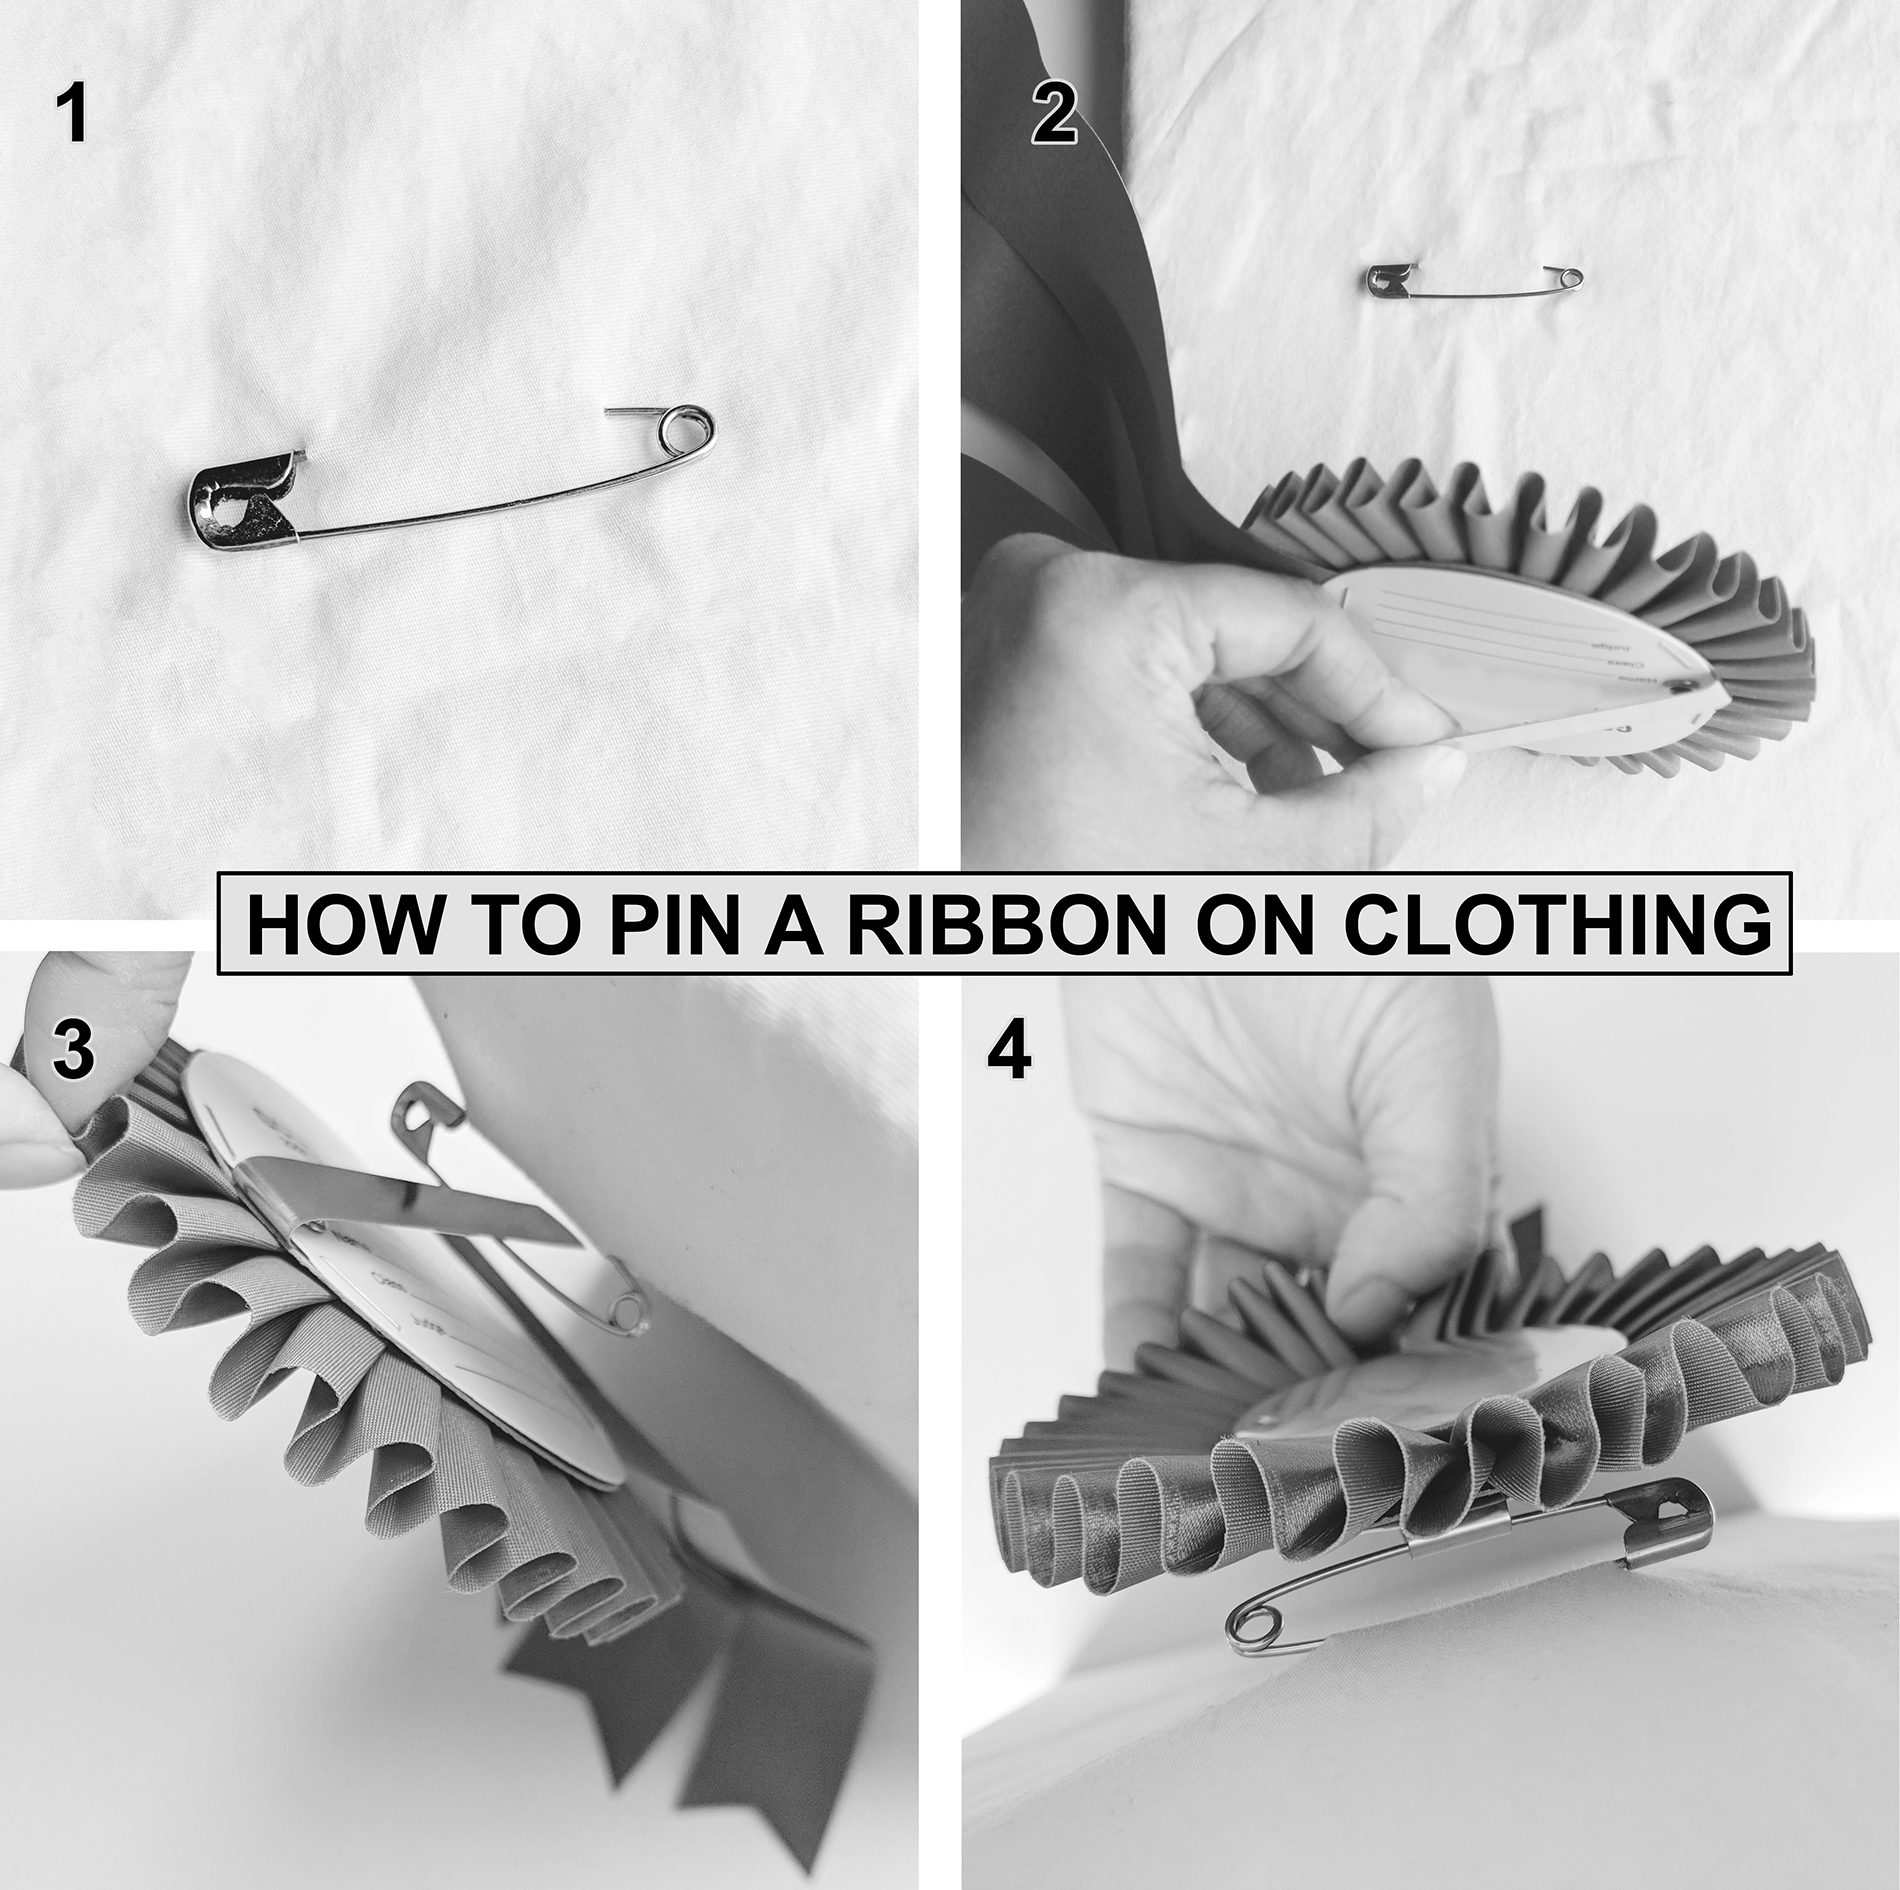 How to pin a rosette